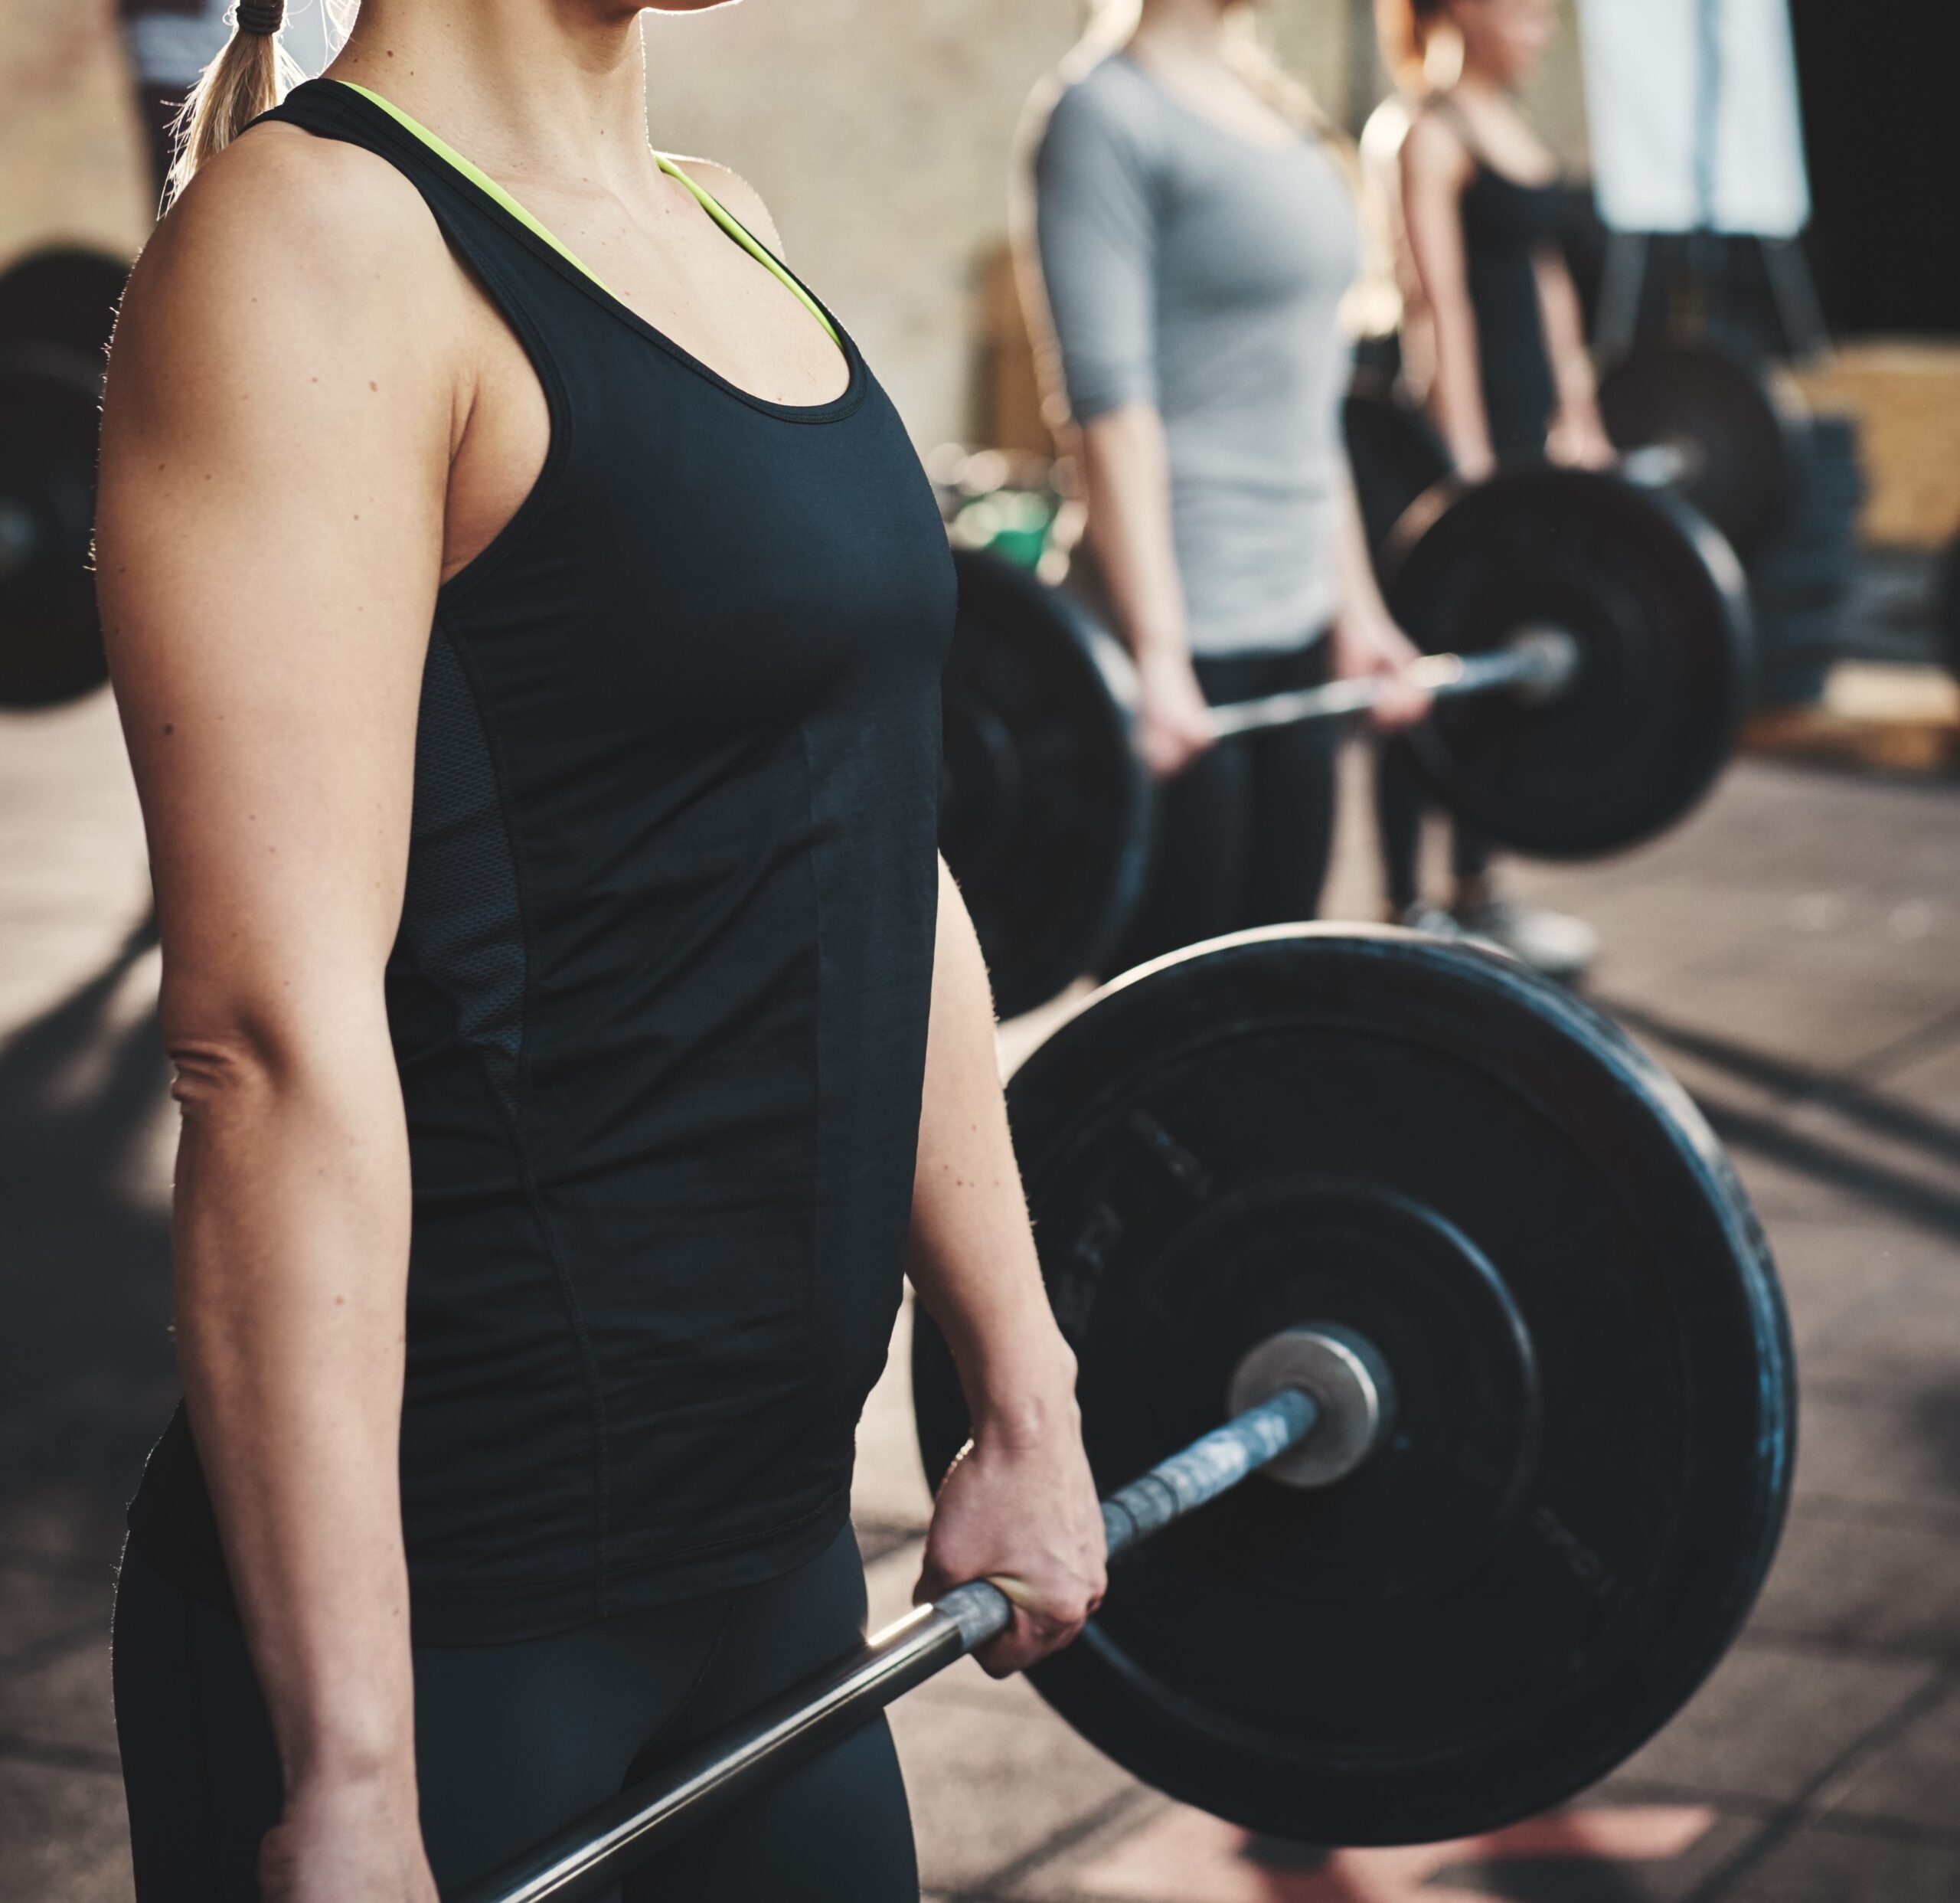 Personal Training For Women In Surry Hills, Sydney